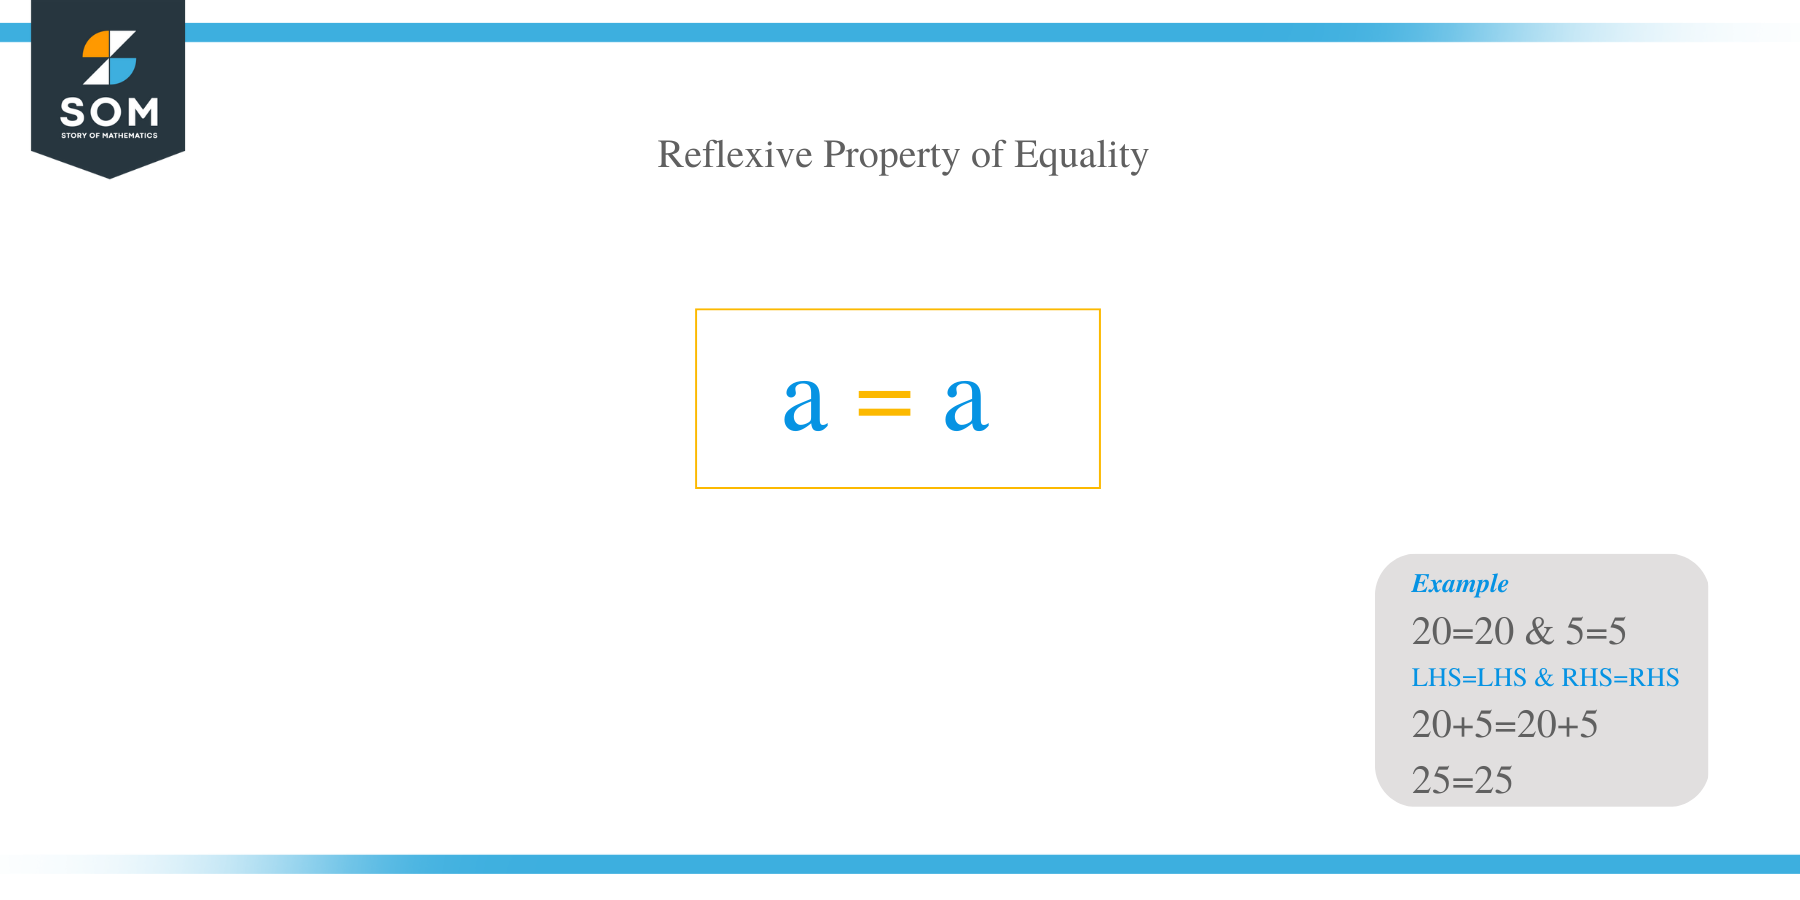 What Is Reflexive Property of Equality?